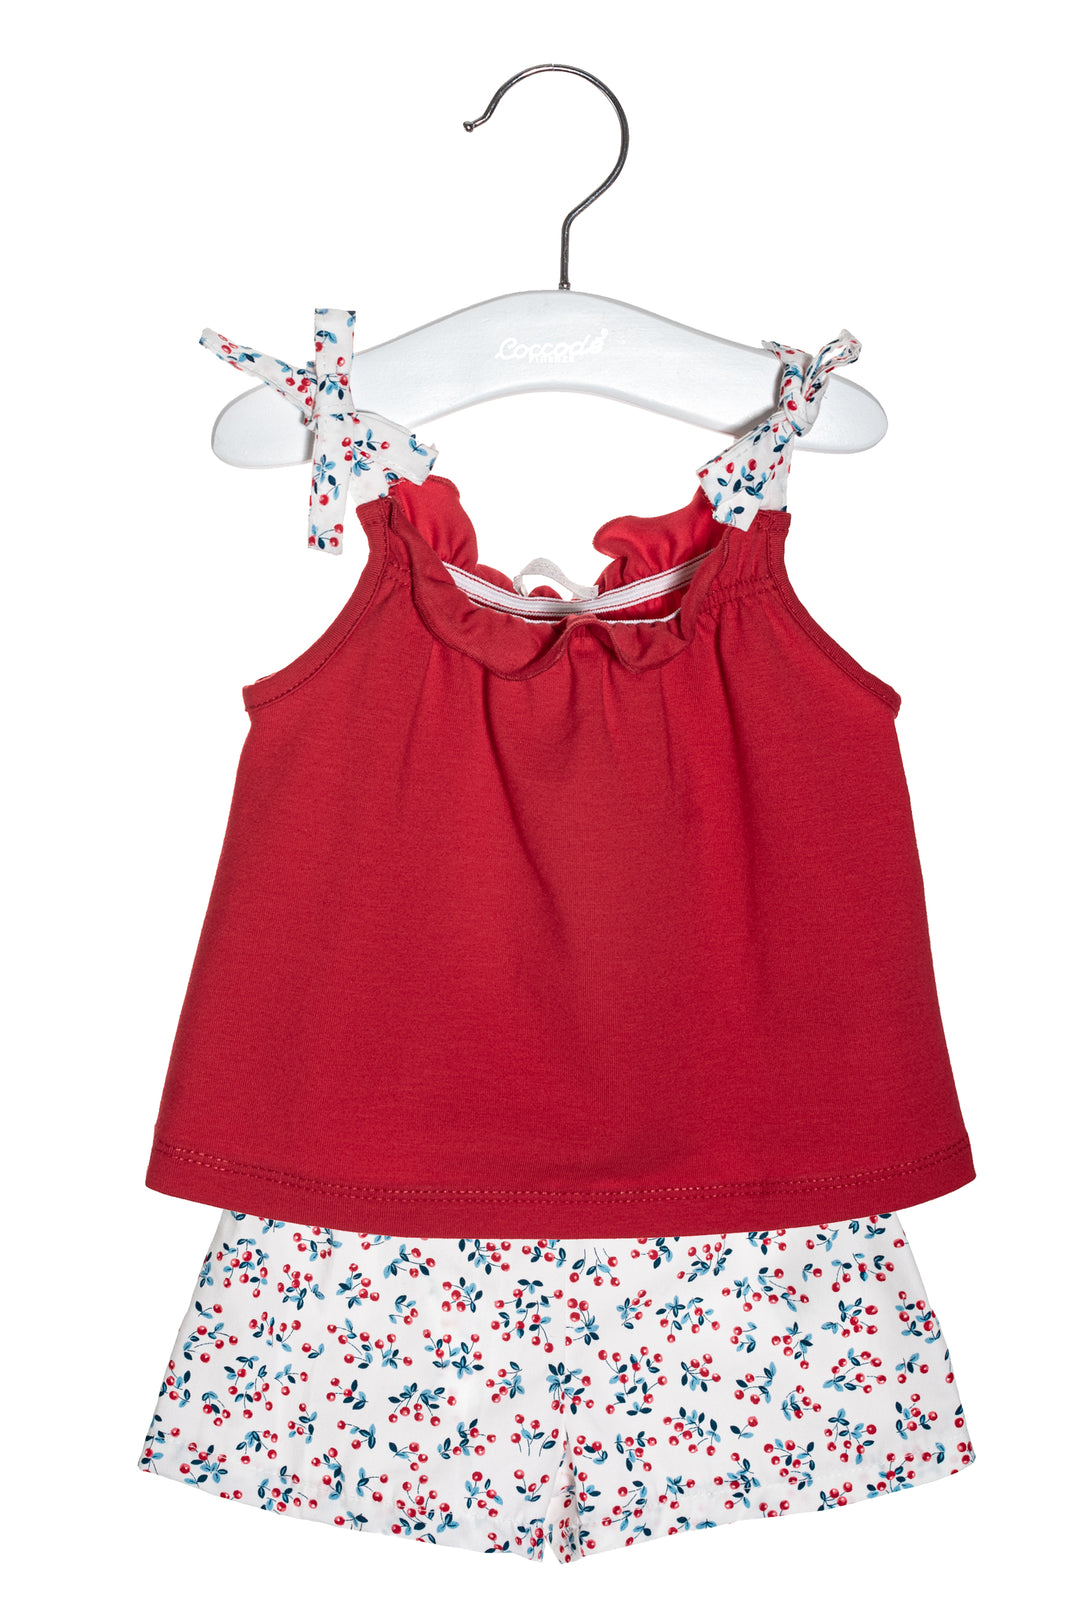 Coccodè "Dixi" Red Cherry Print Blouse & Shorts | iphoneandroidapplications